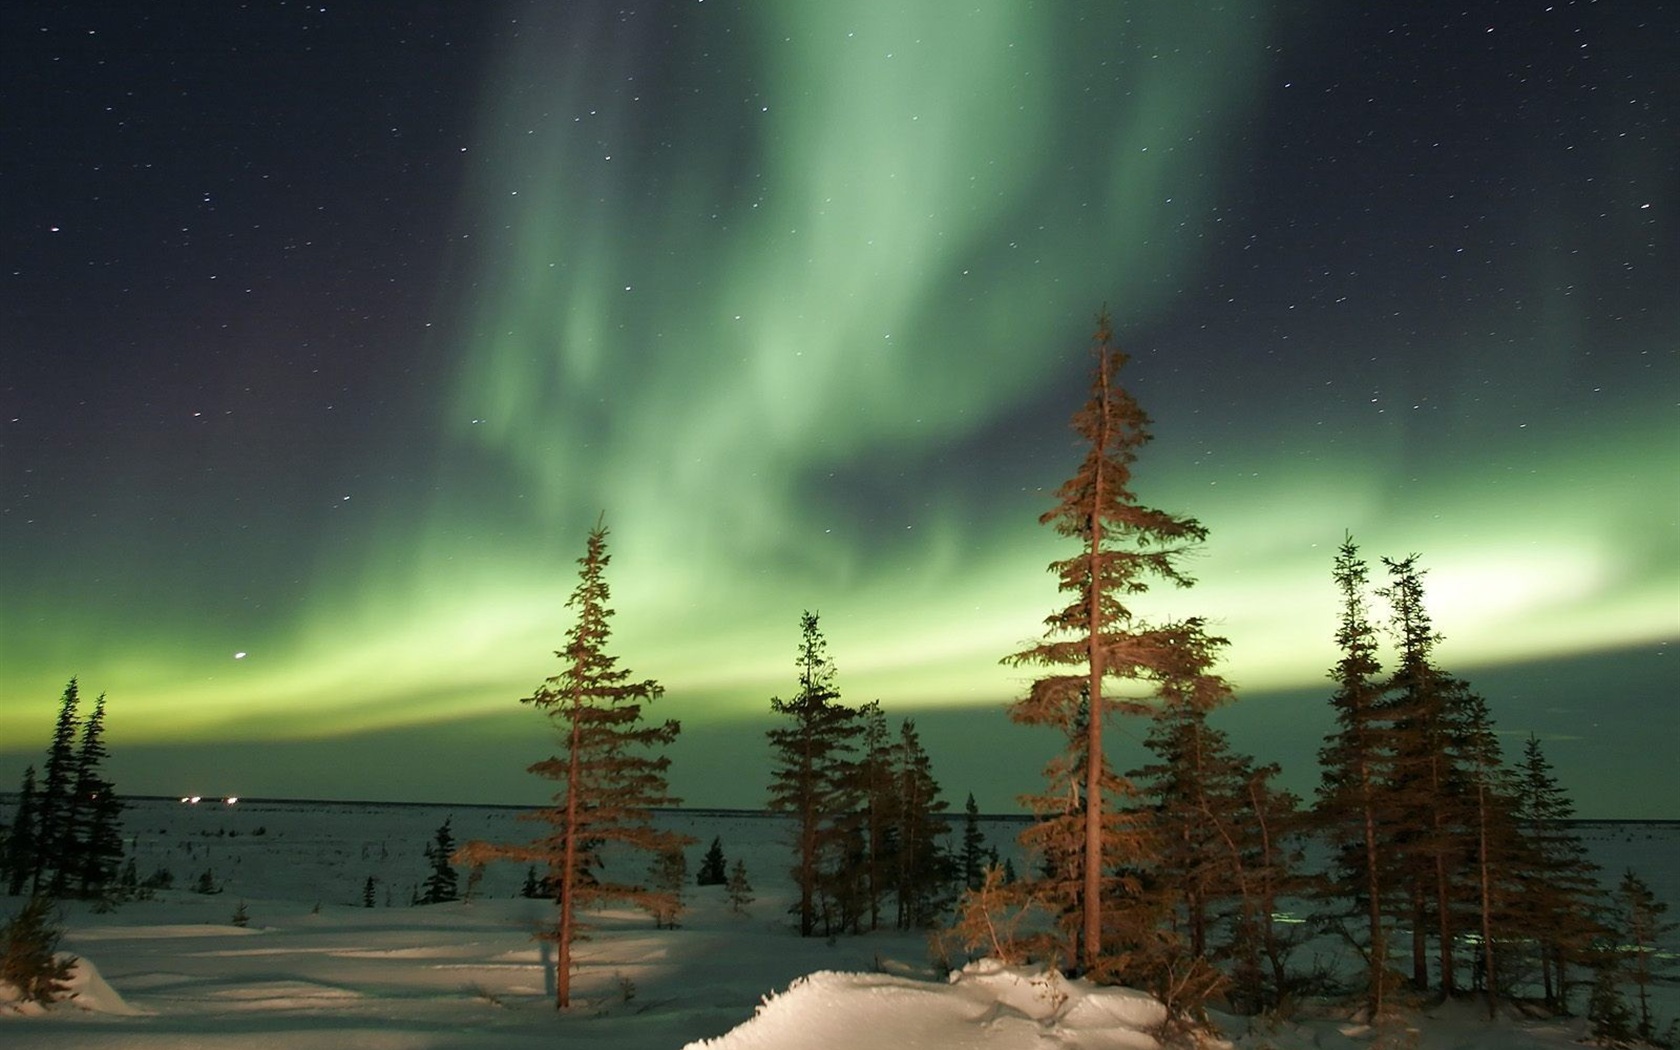 Natural wonders of the Northern Lights HD Wallpaper (2) #3 - 1680x1050